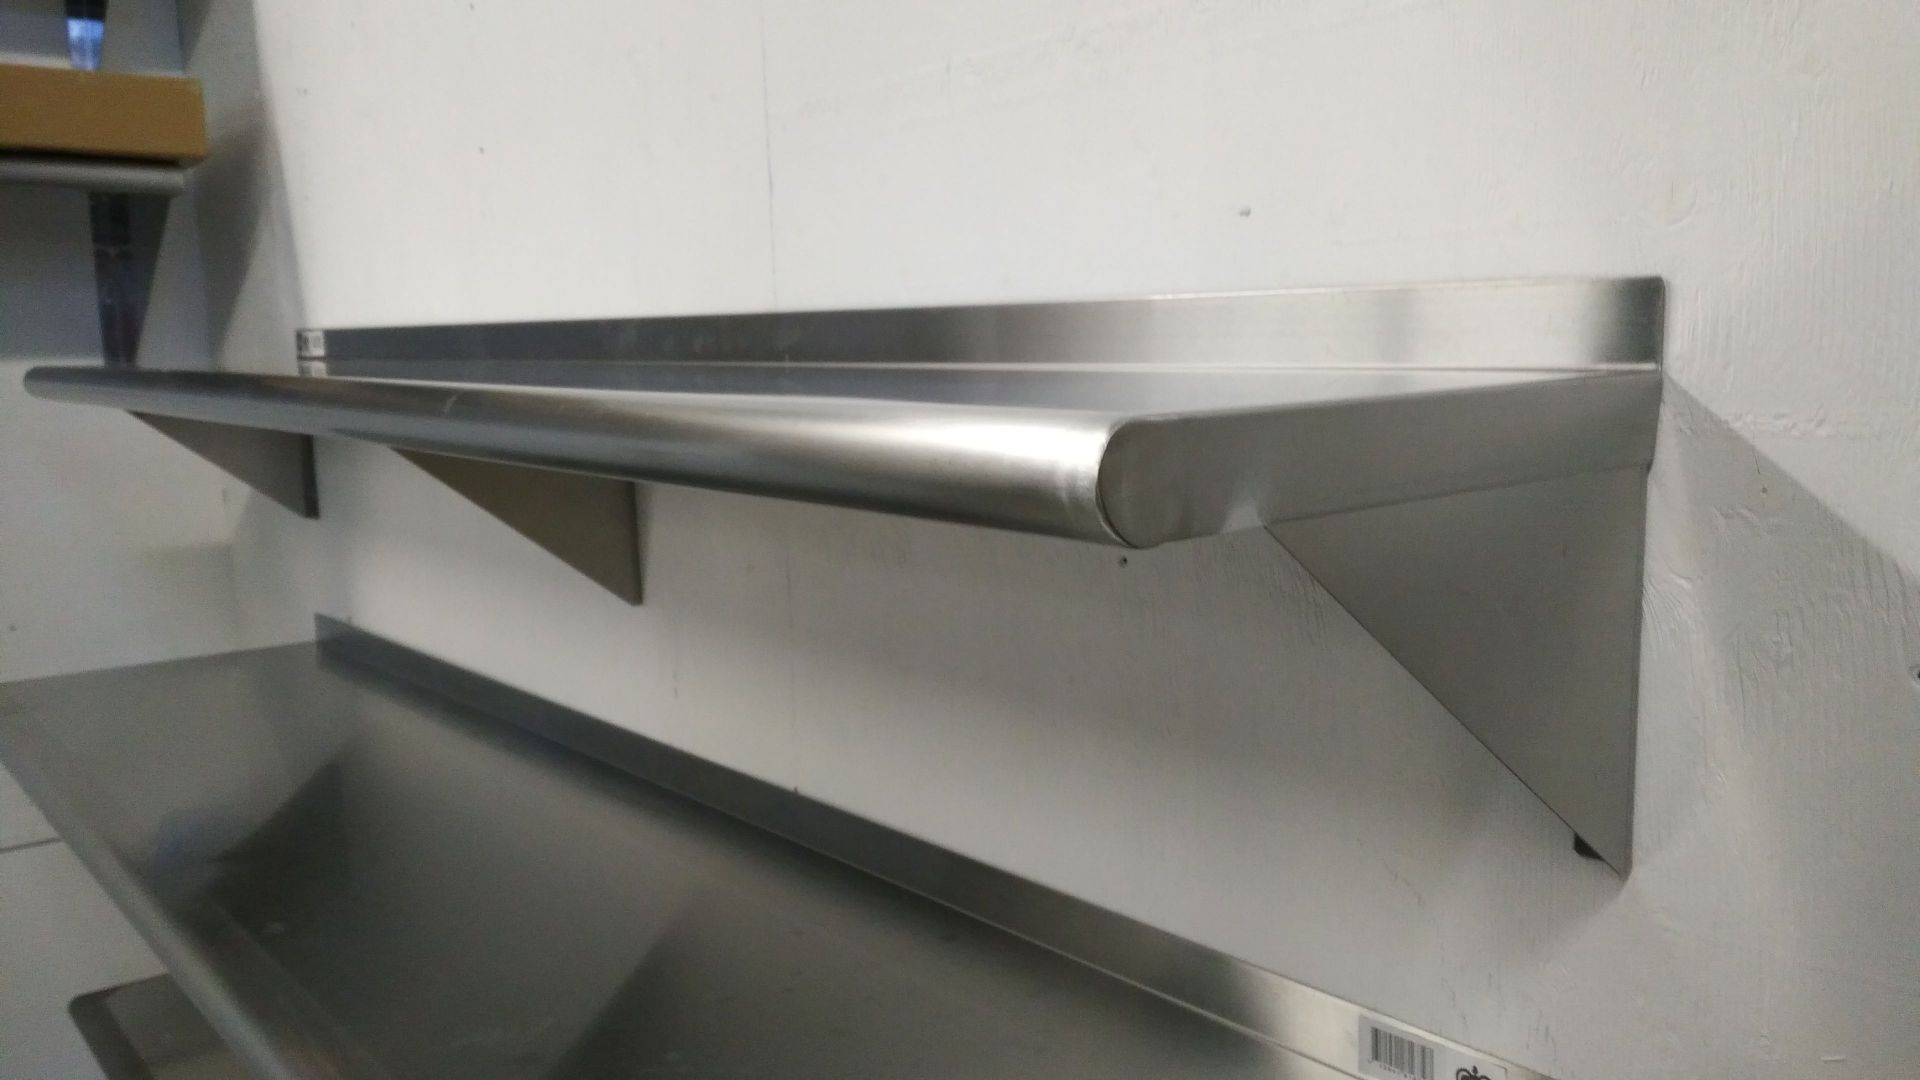 12" x 72" Stainless Wall Shelves - Lot of 2 - Image 5 of 7